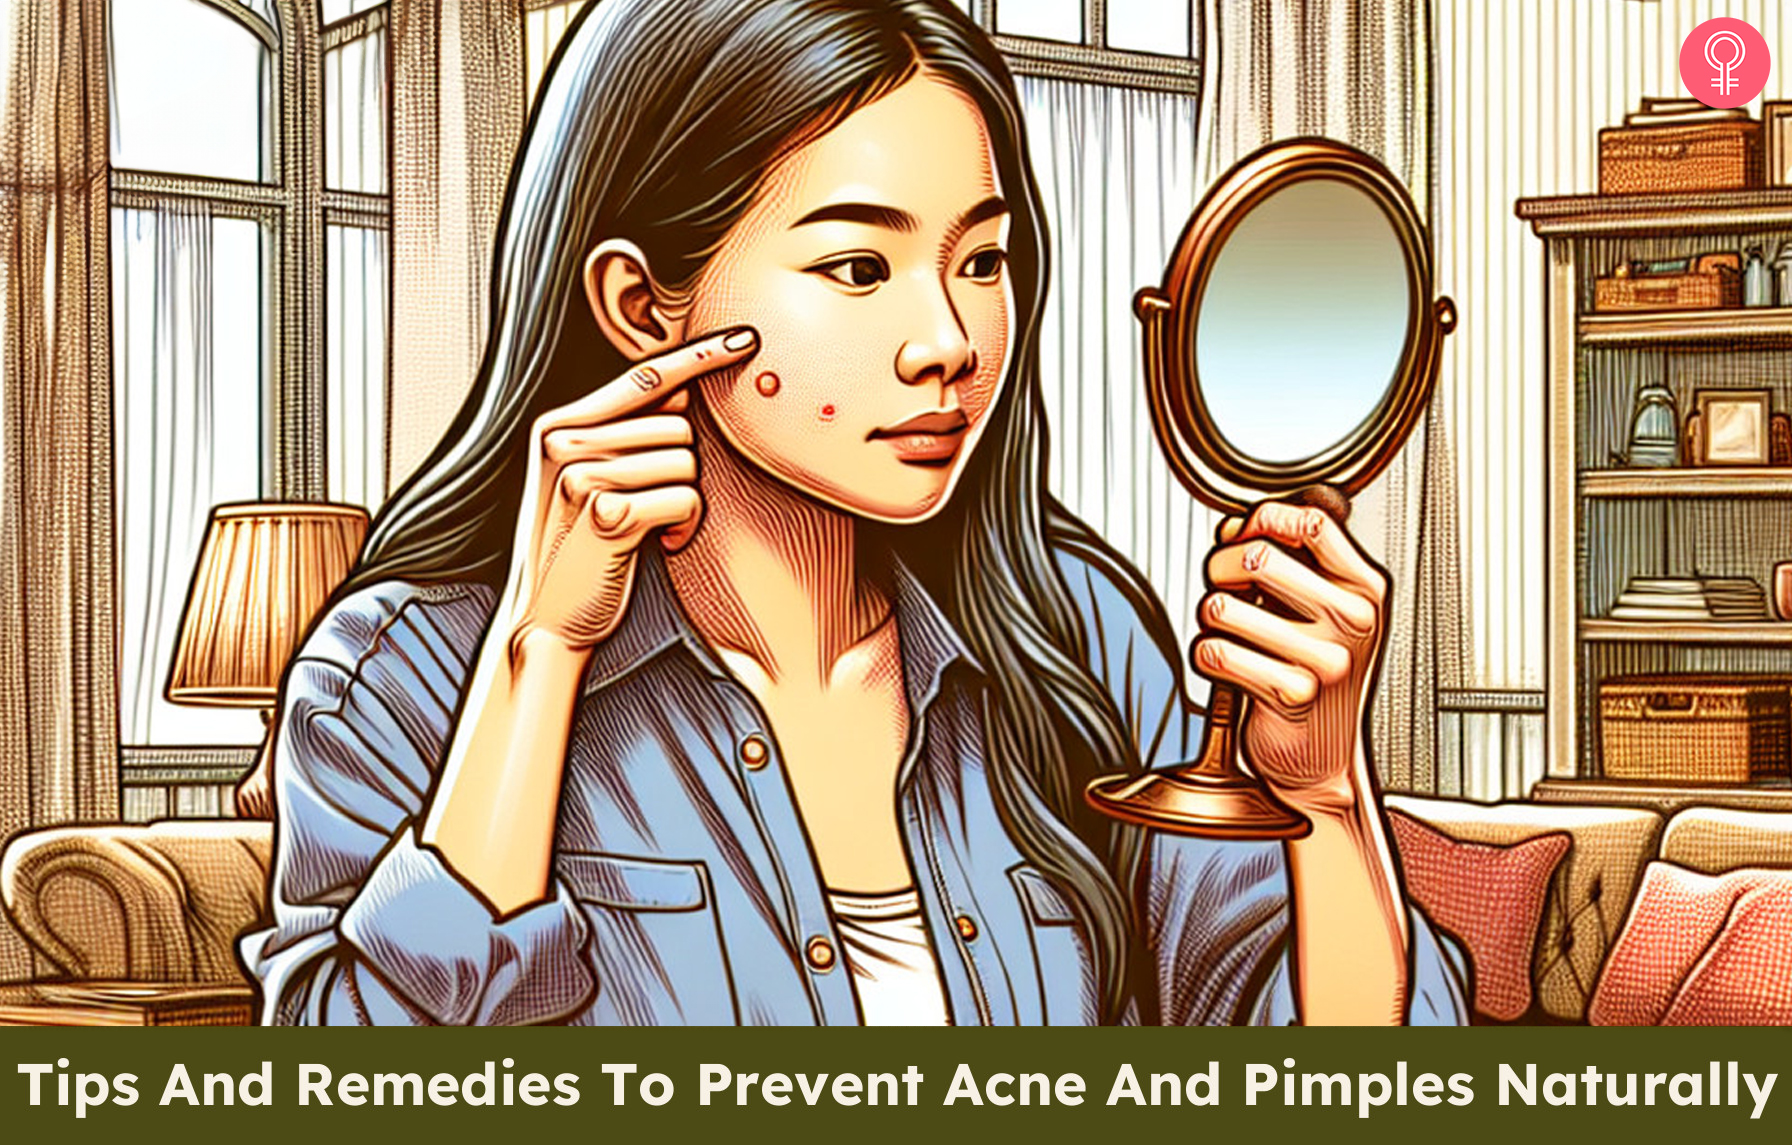 13 Tips And Remedies To Prevent Acne And Pimples Naturally